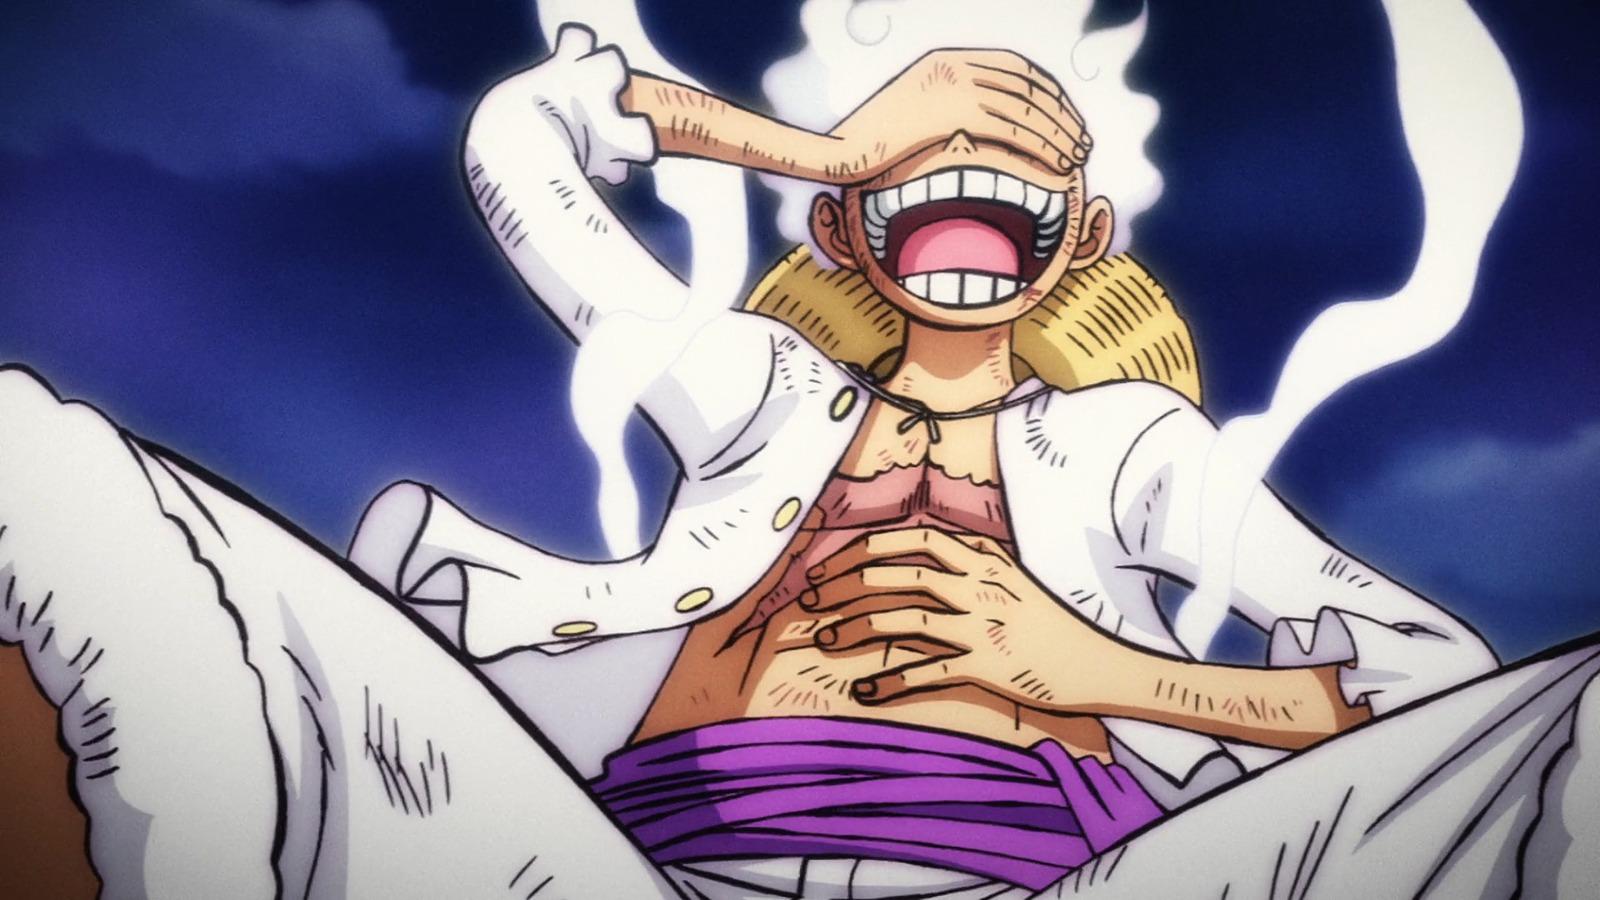 An image featuring One Piece Gear 5 Luffy